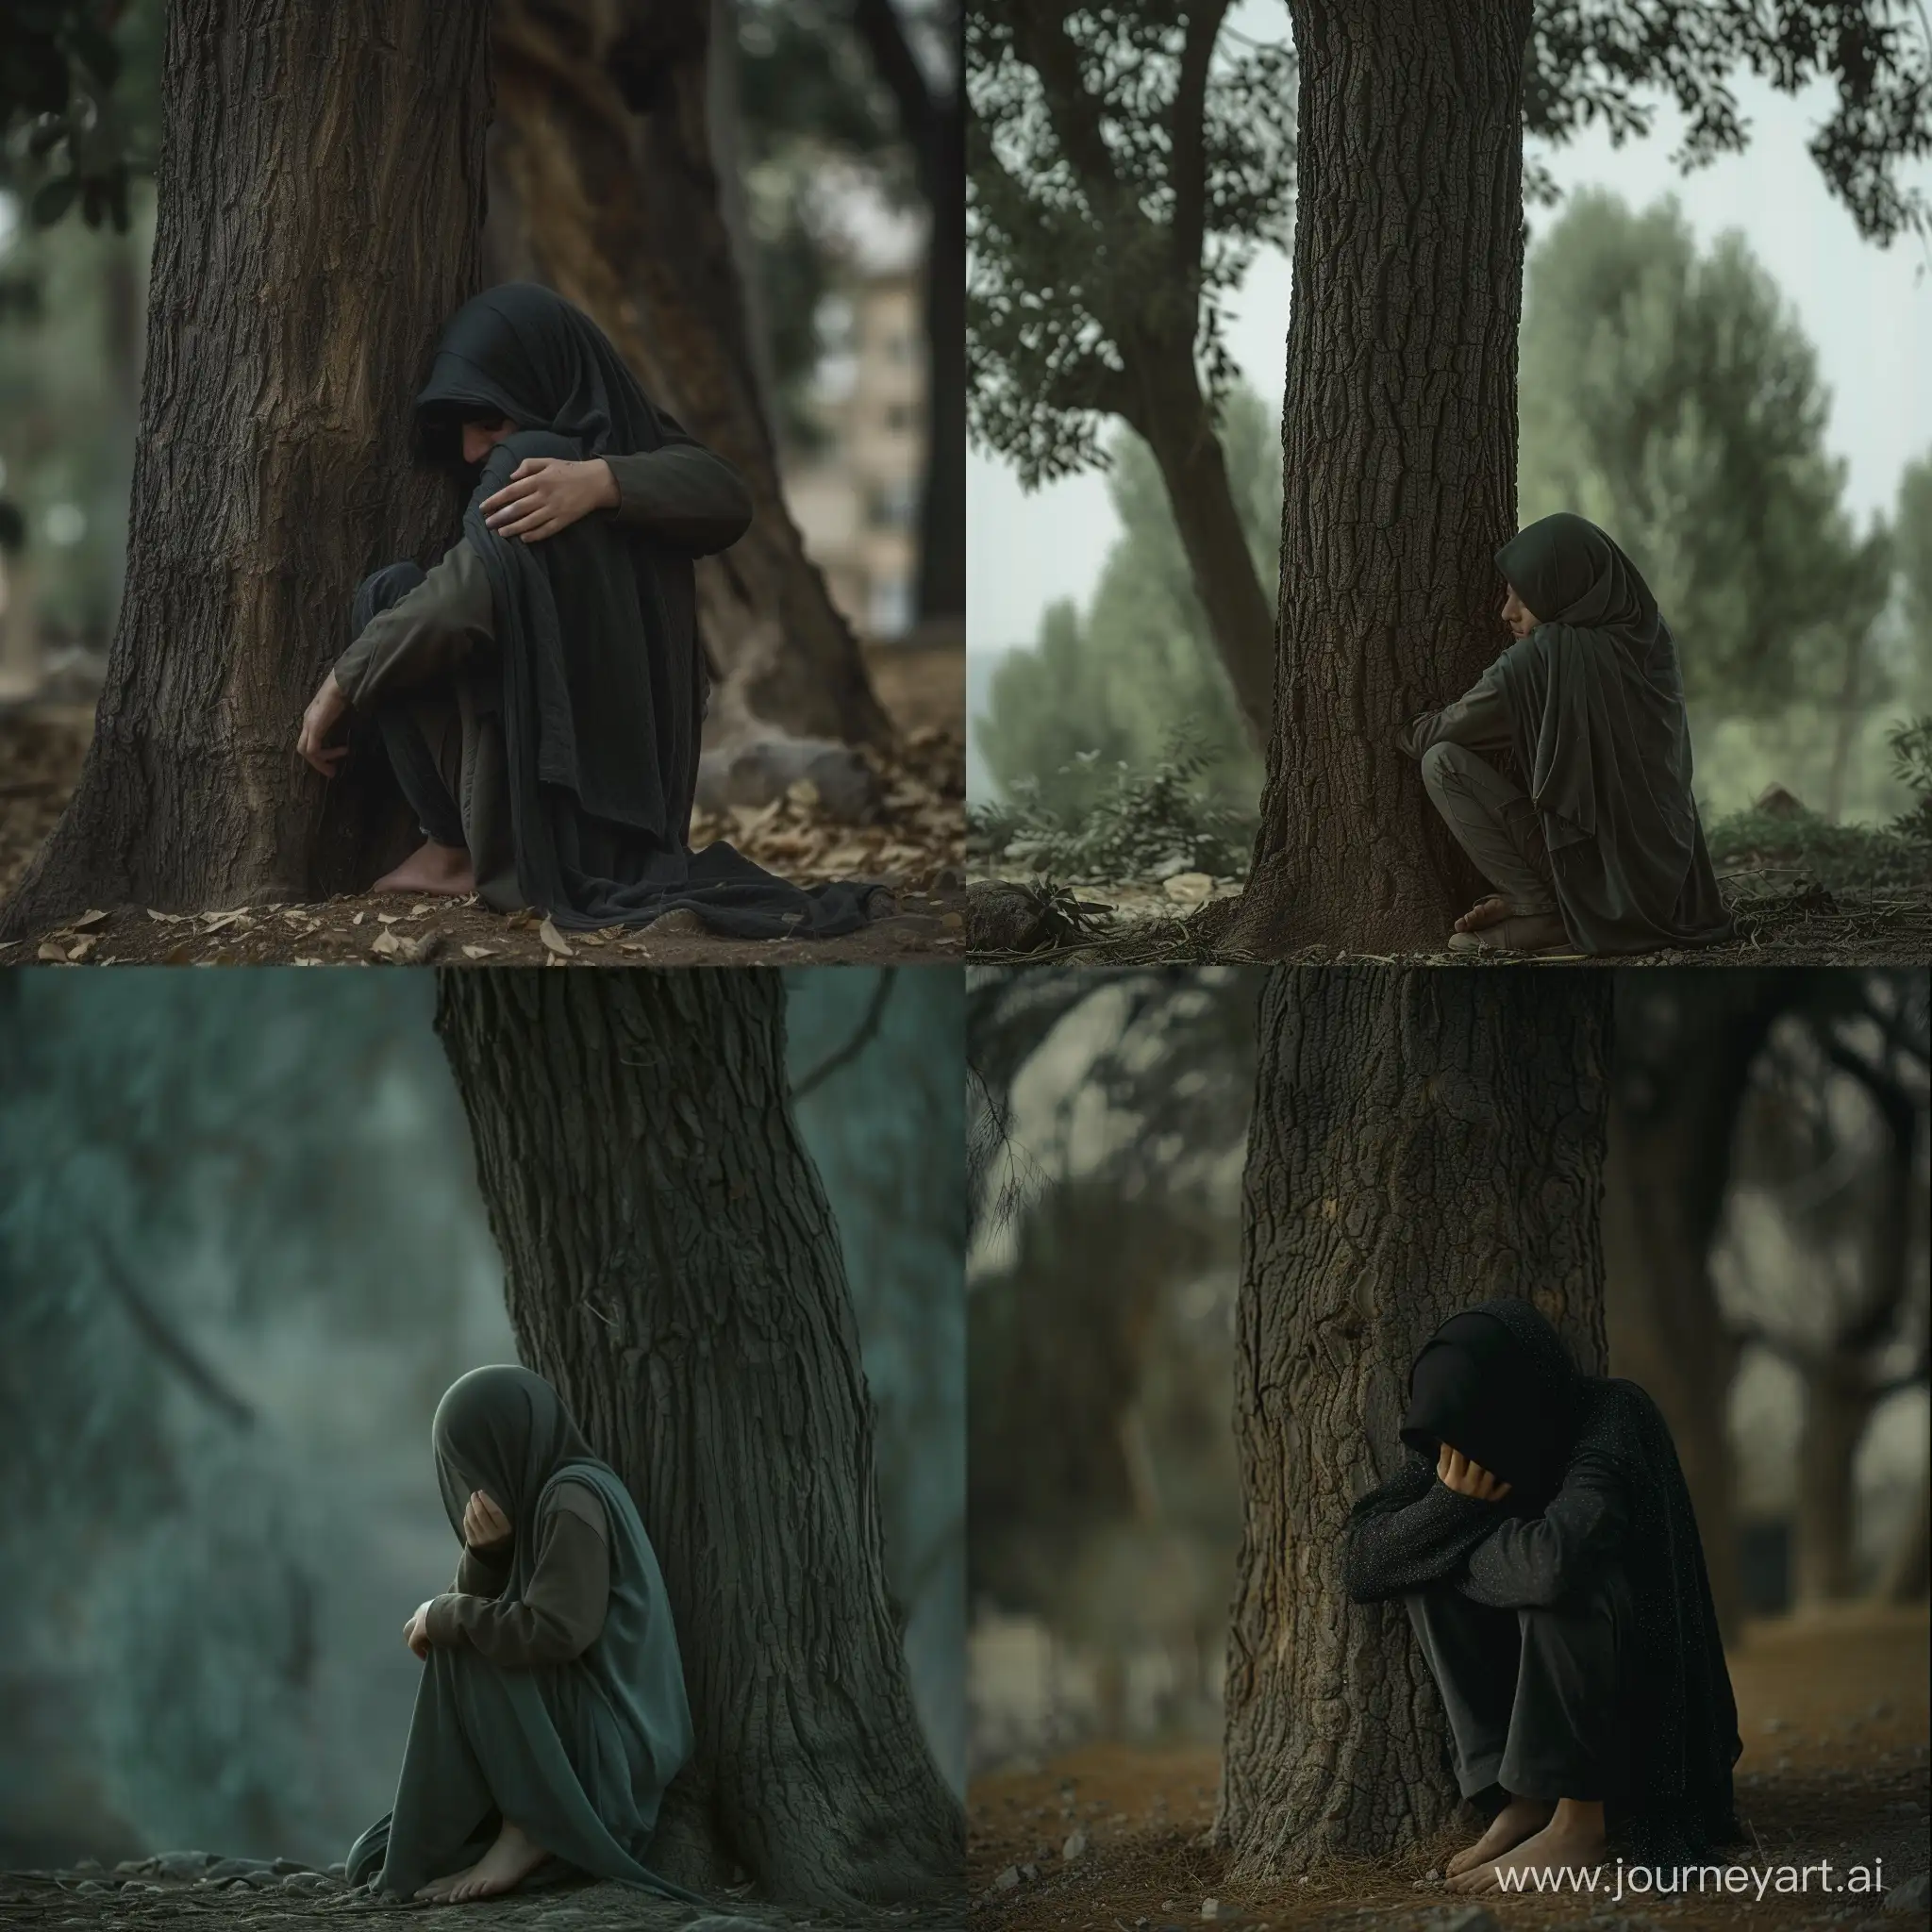 A real and natural photo of an Iranian girl with a hijab, shedding tears. He hugged his knees. Next to a big tree.